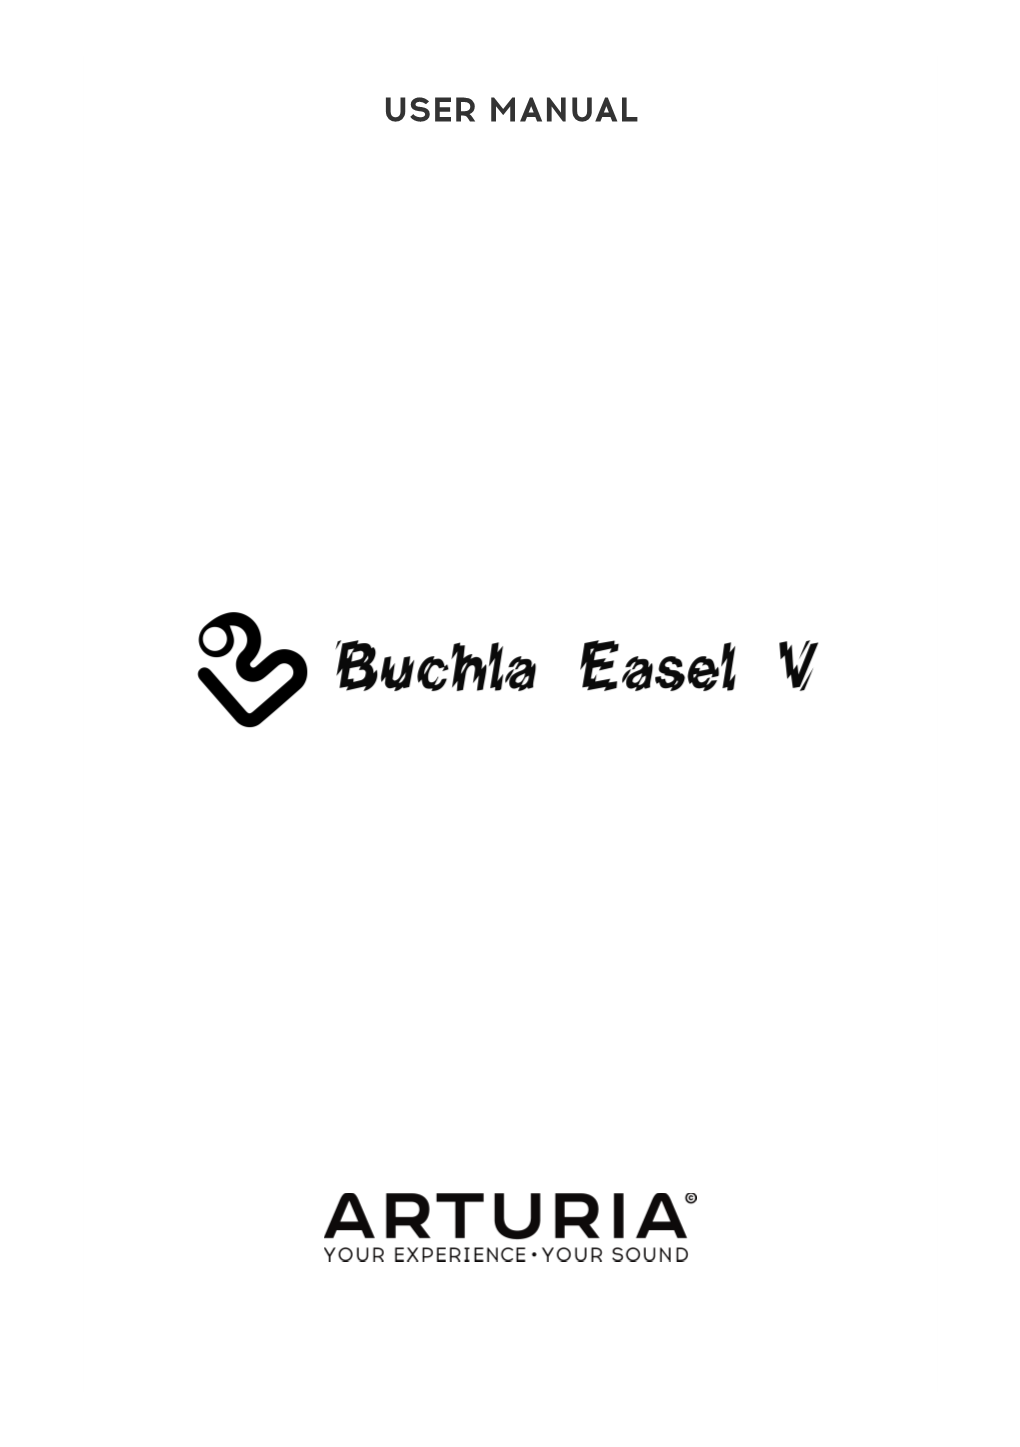 User Manual Buchla Easel V - Welcome Buchla for a Long Time Flatly Refused to Add a Keyboard to His Instruments